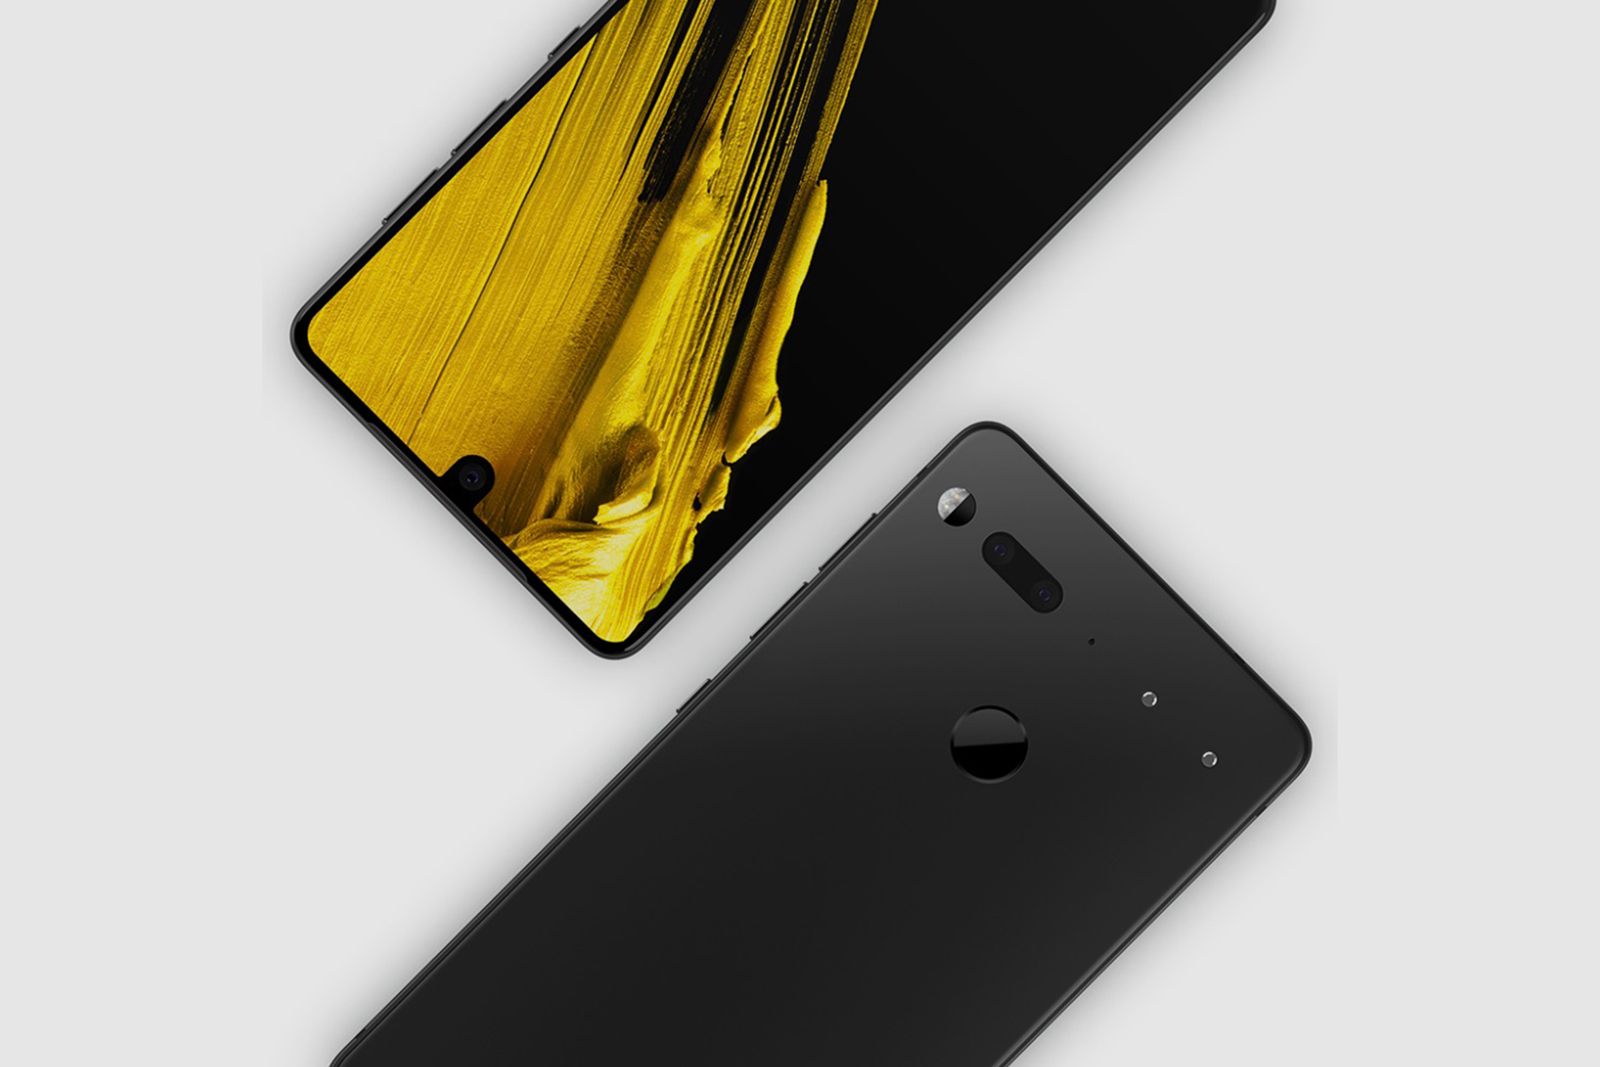 Essential is shutting down What that means for your Essential Phone PH-1 image 1